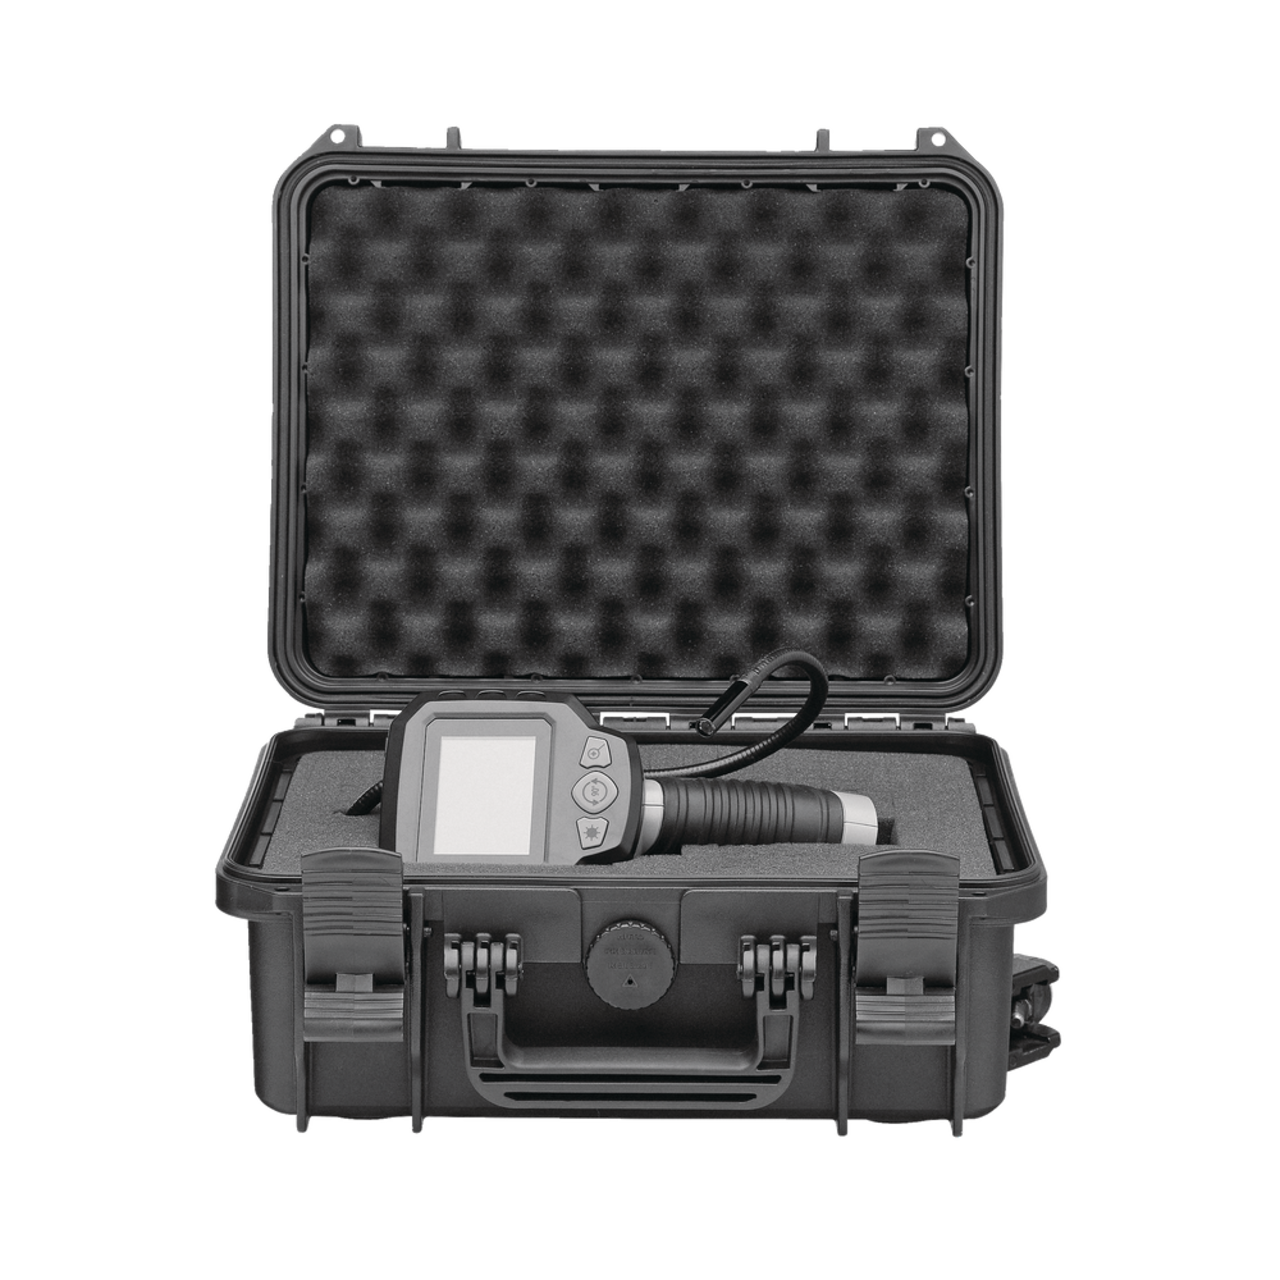 MAXIMUM Portable IP67 Waterproof Case/ Tool Box with Foam Layers, Black,  Large, 22-in